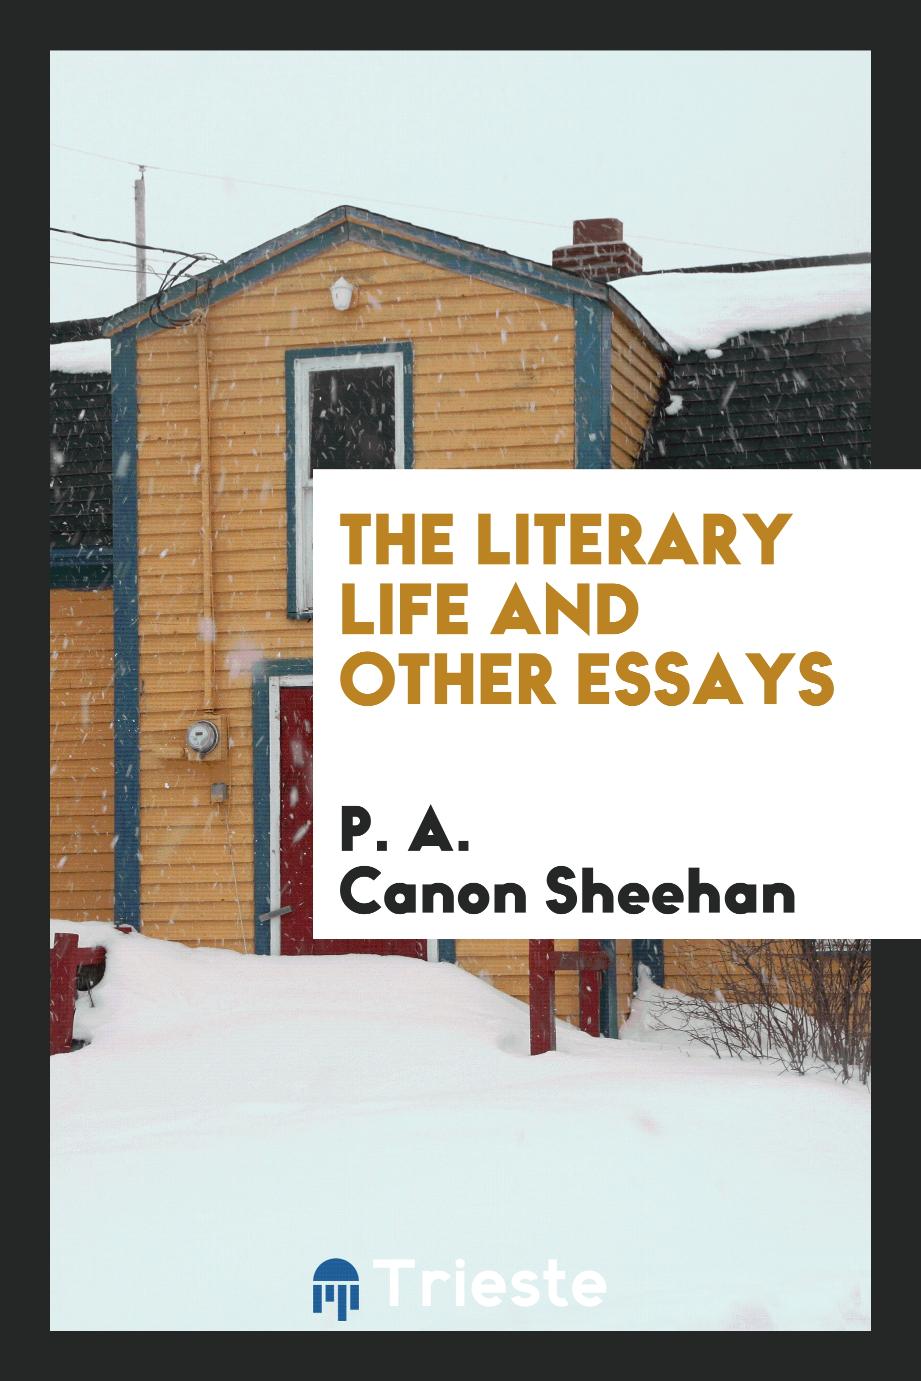 The literary life and other essays